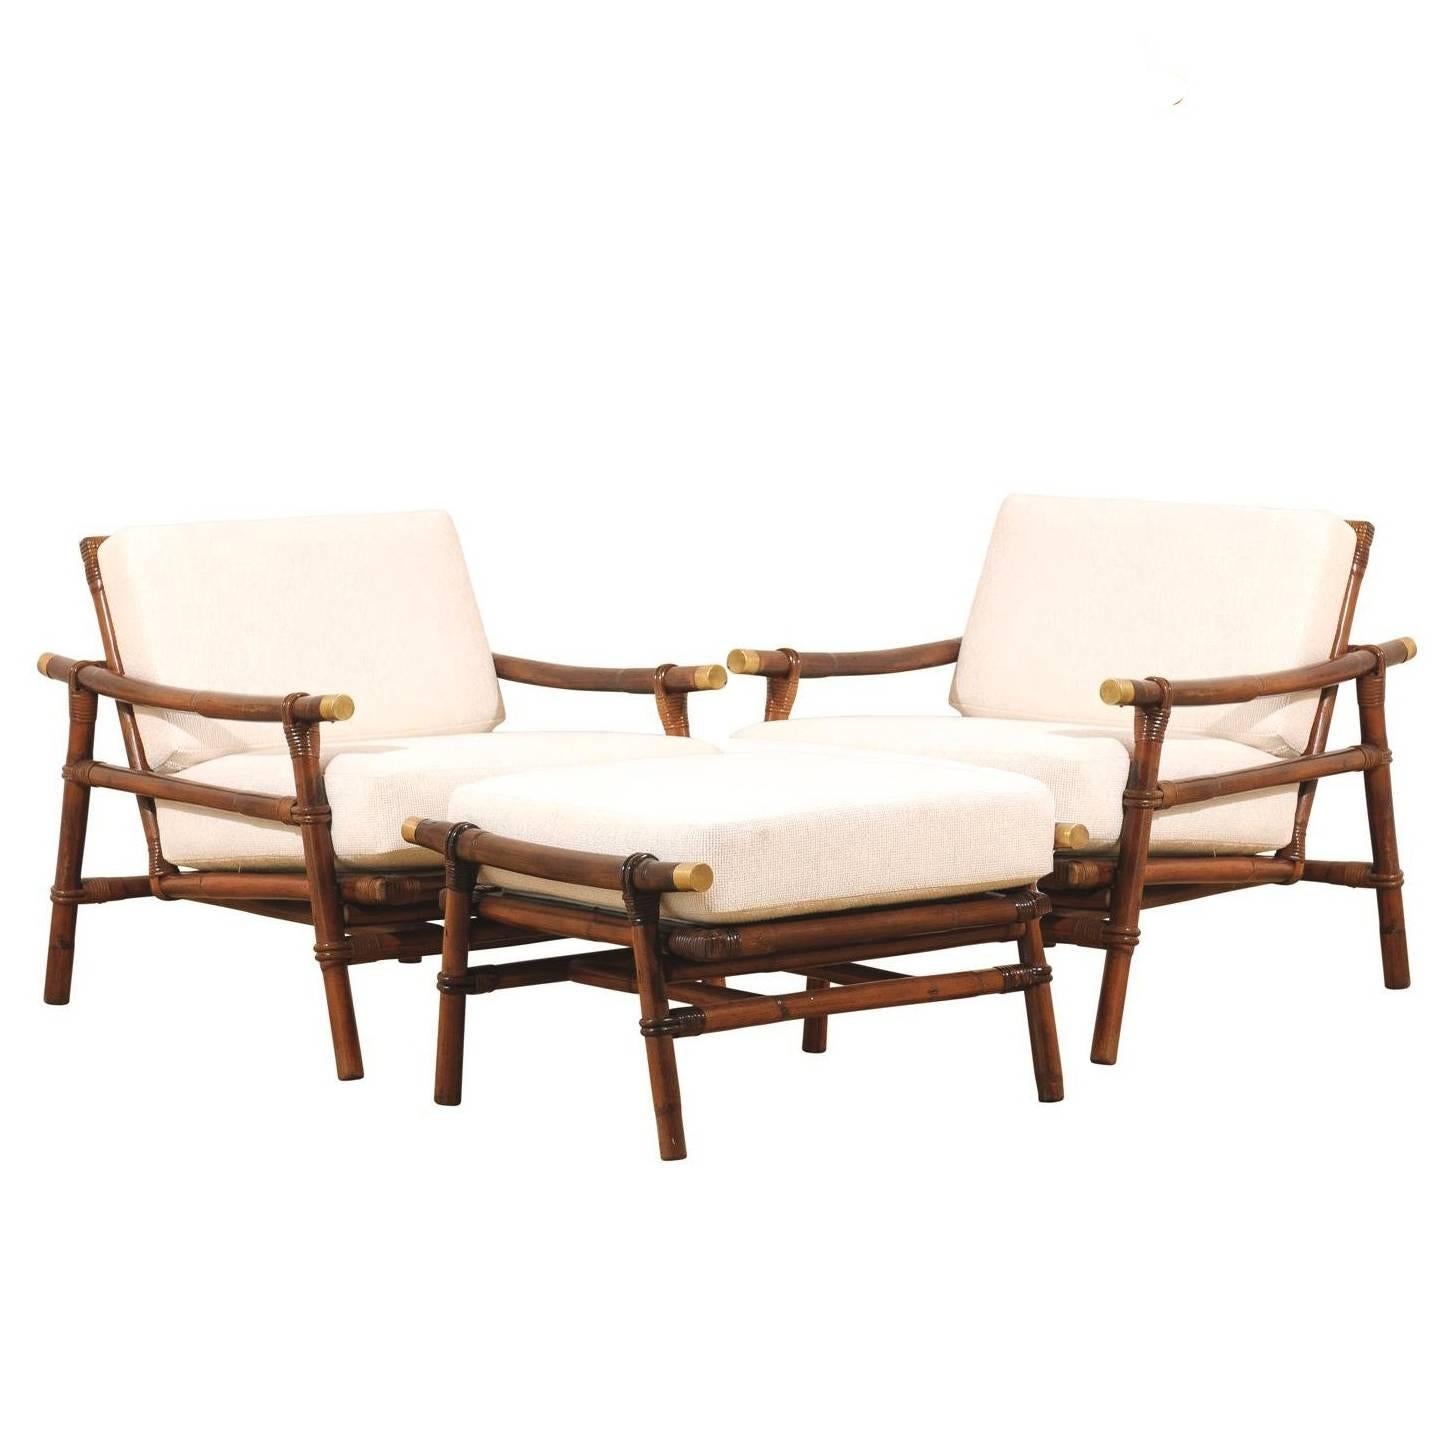 Superb Restored Pair of Loungers by Wisner for Ficks Reed, circa 1954 